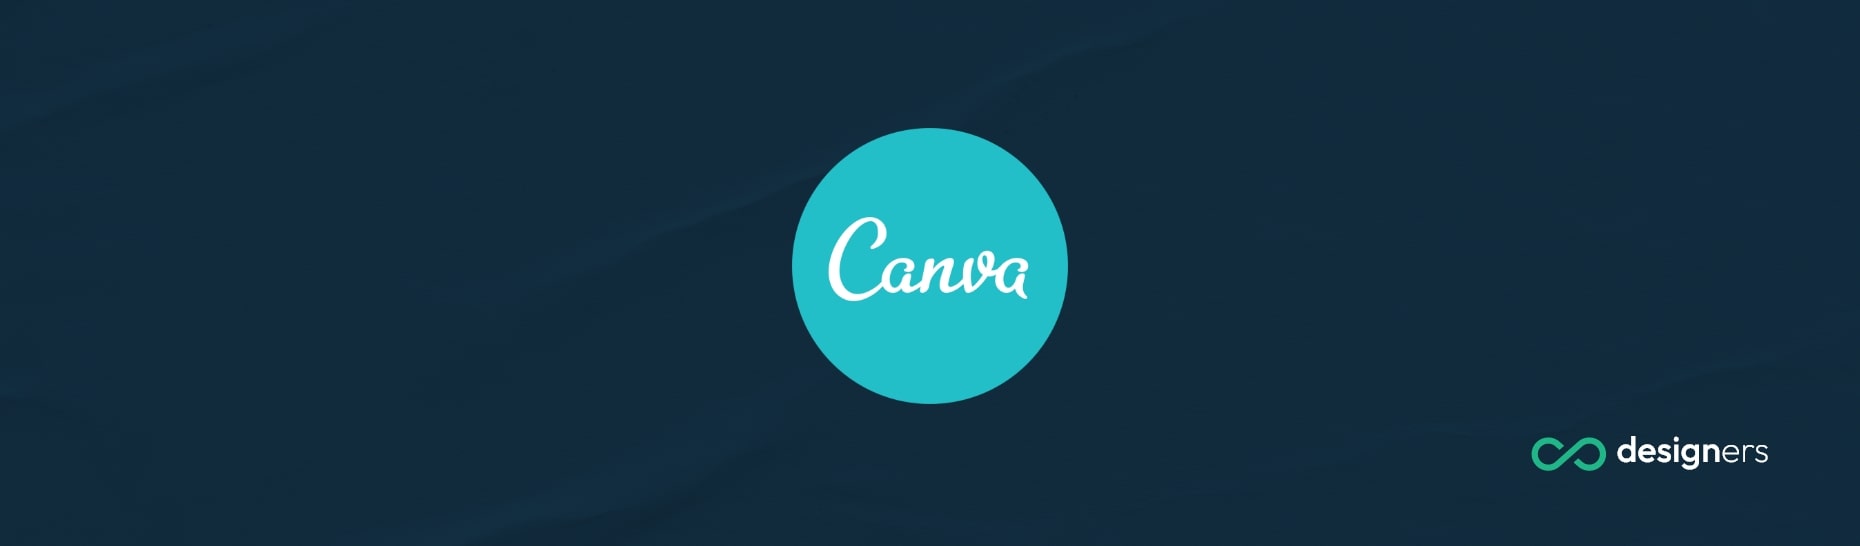 Is Canva a Good Replacement for Photoshop?